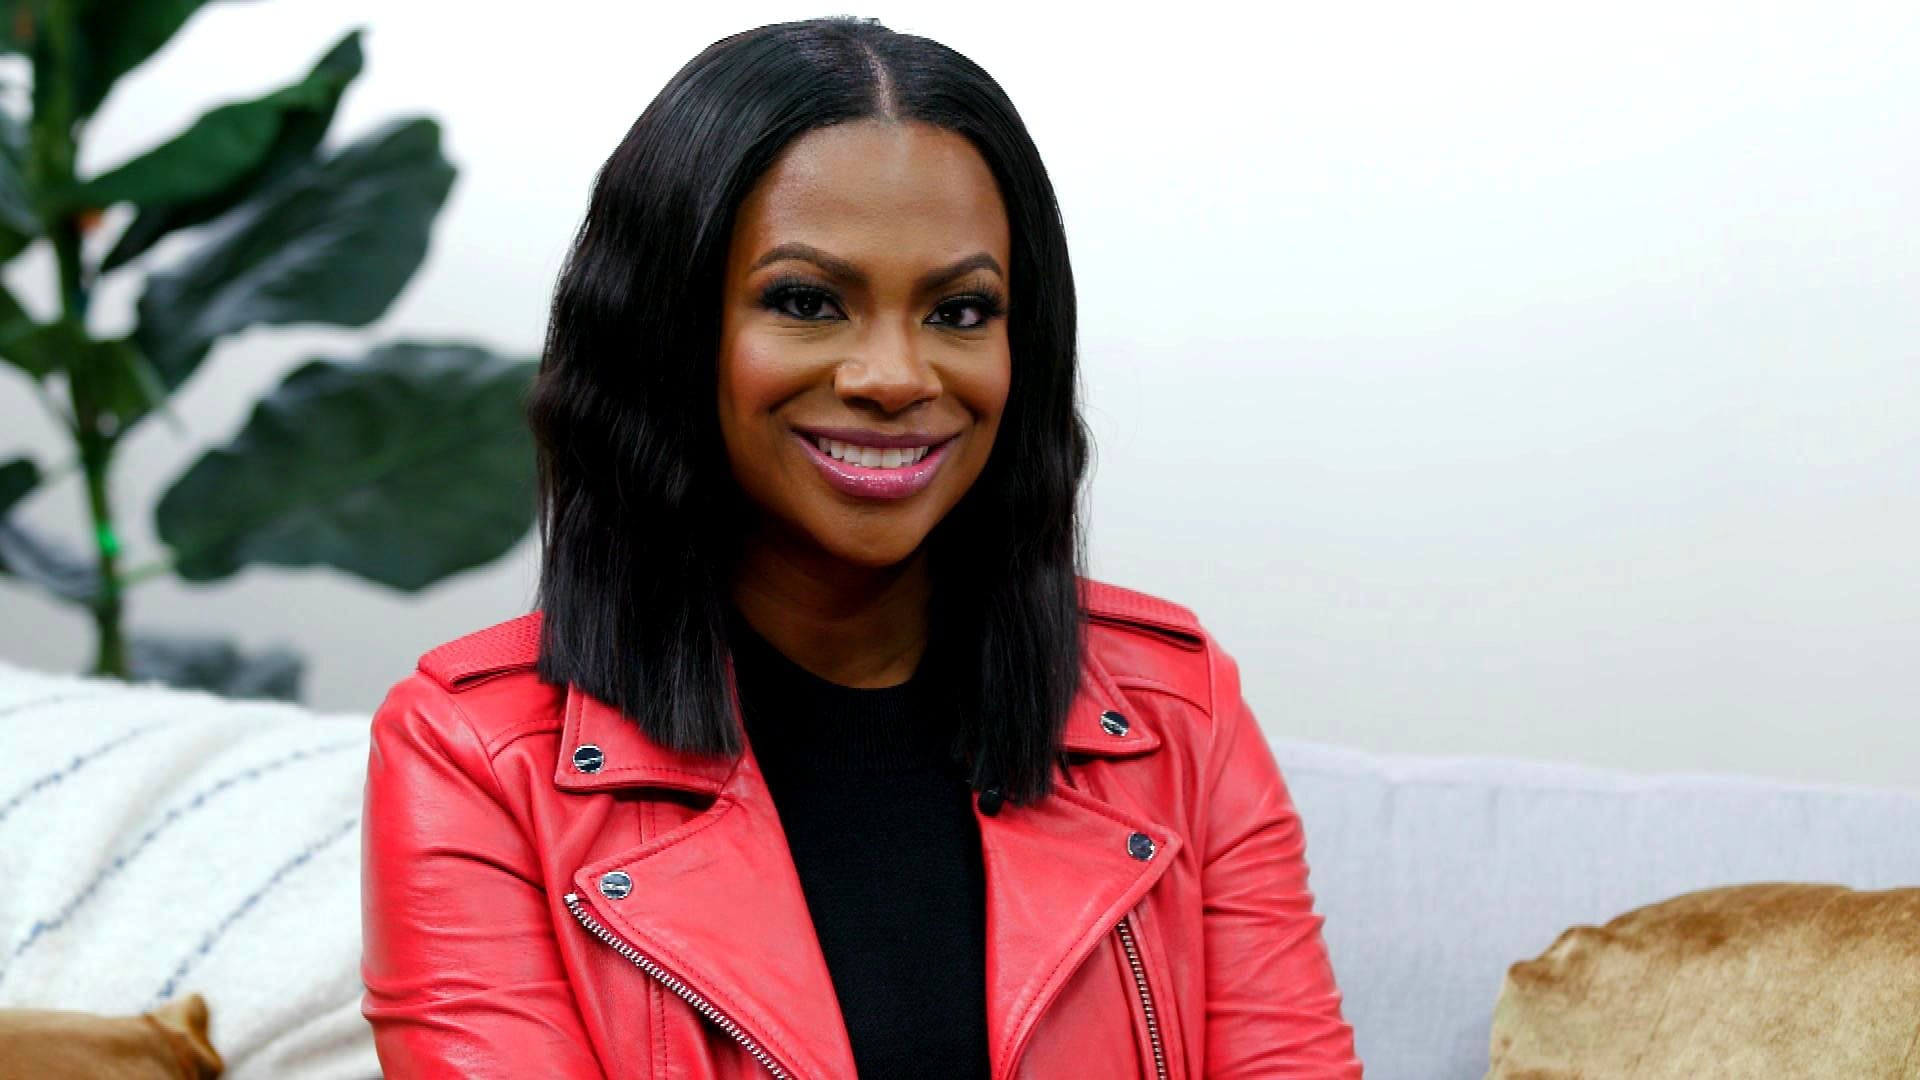 Kandi Burruss Had An Excellent Convo With Jarrett Hill - See The Video Here